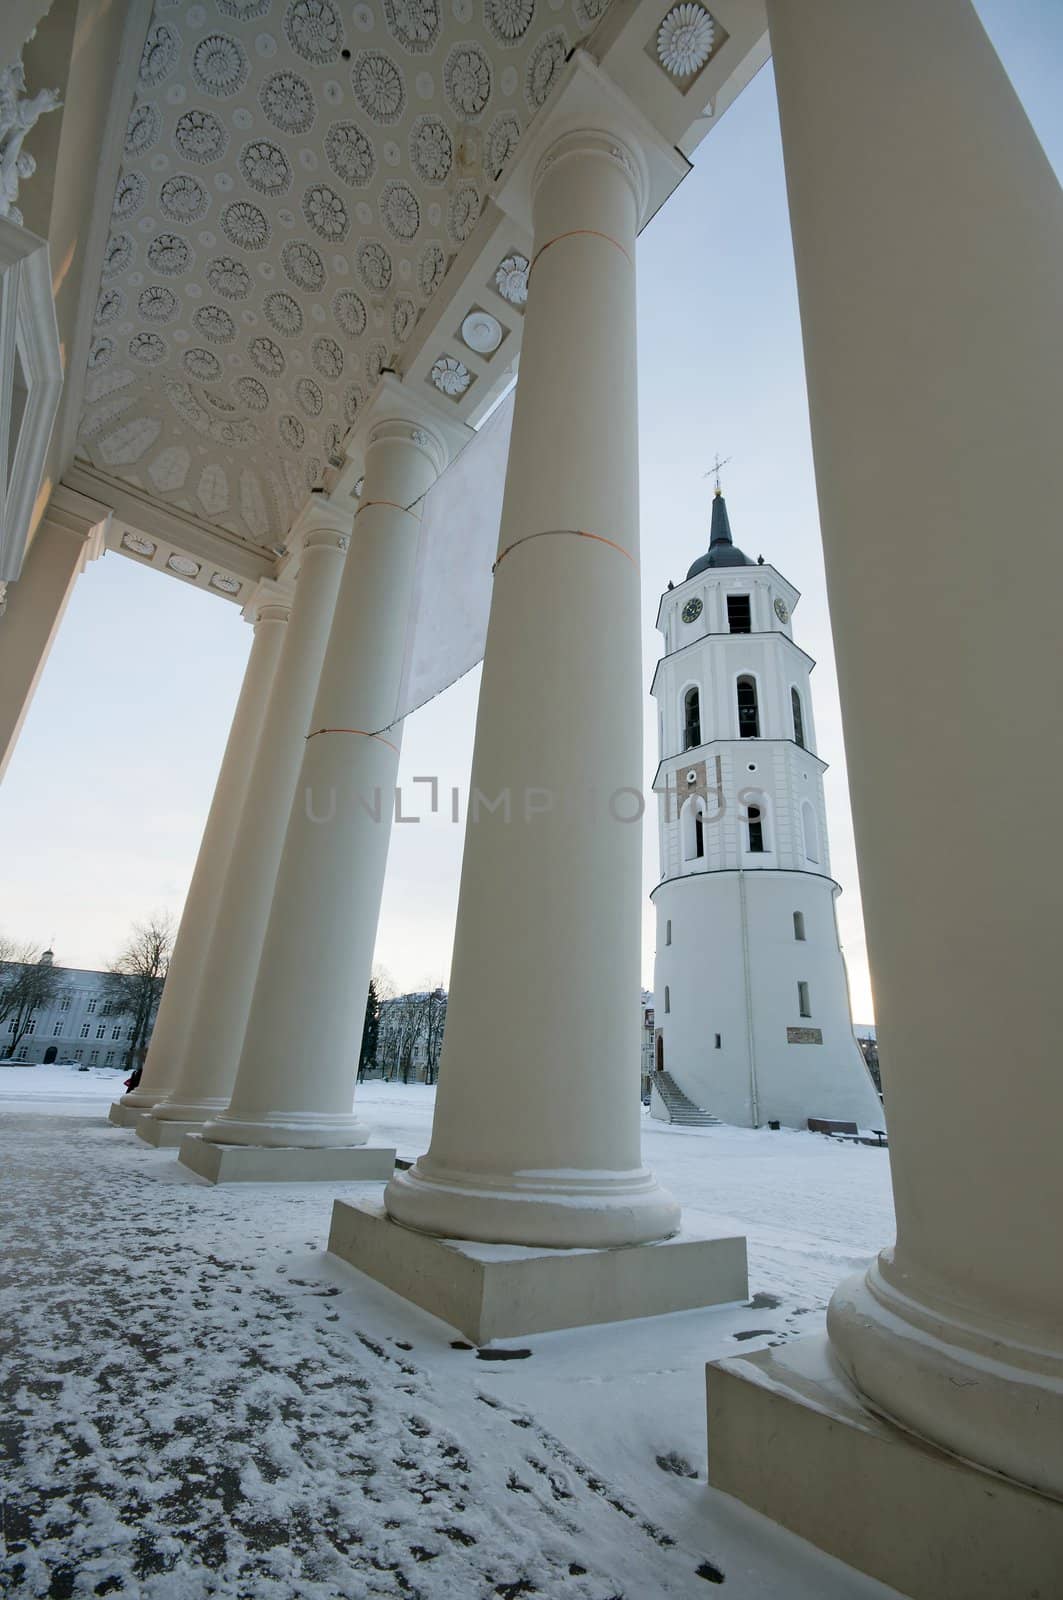 Bell tower and Catethral columns on Cathedral Square in Vilnius, Lithuania